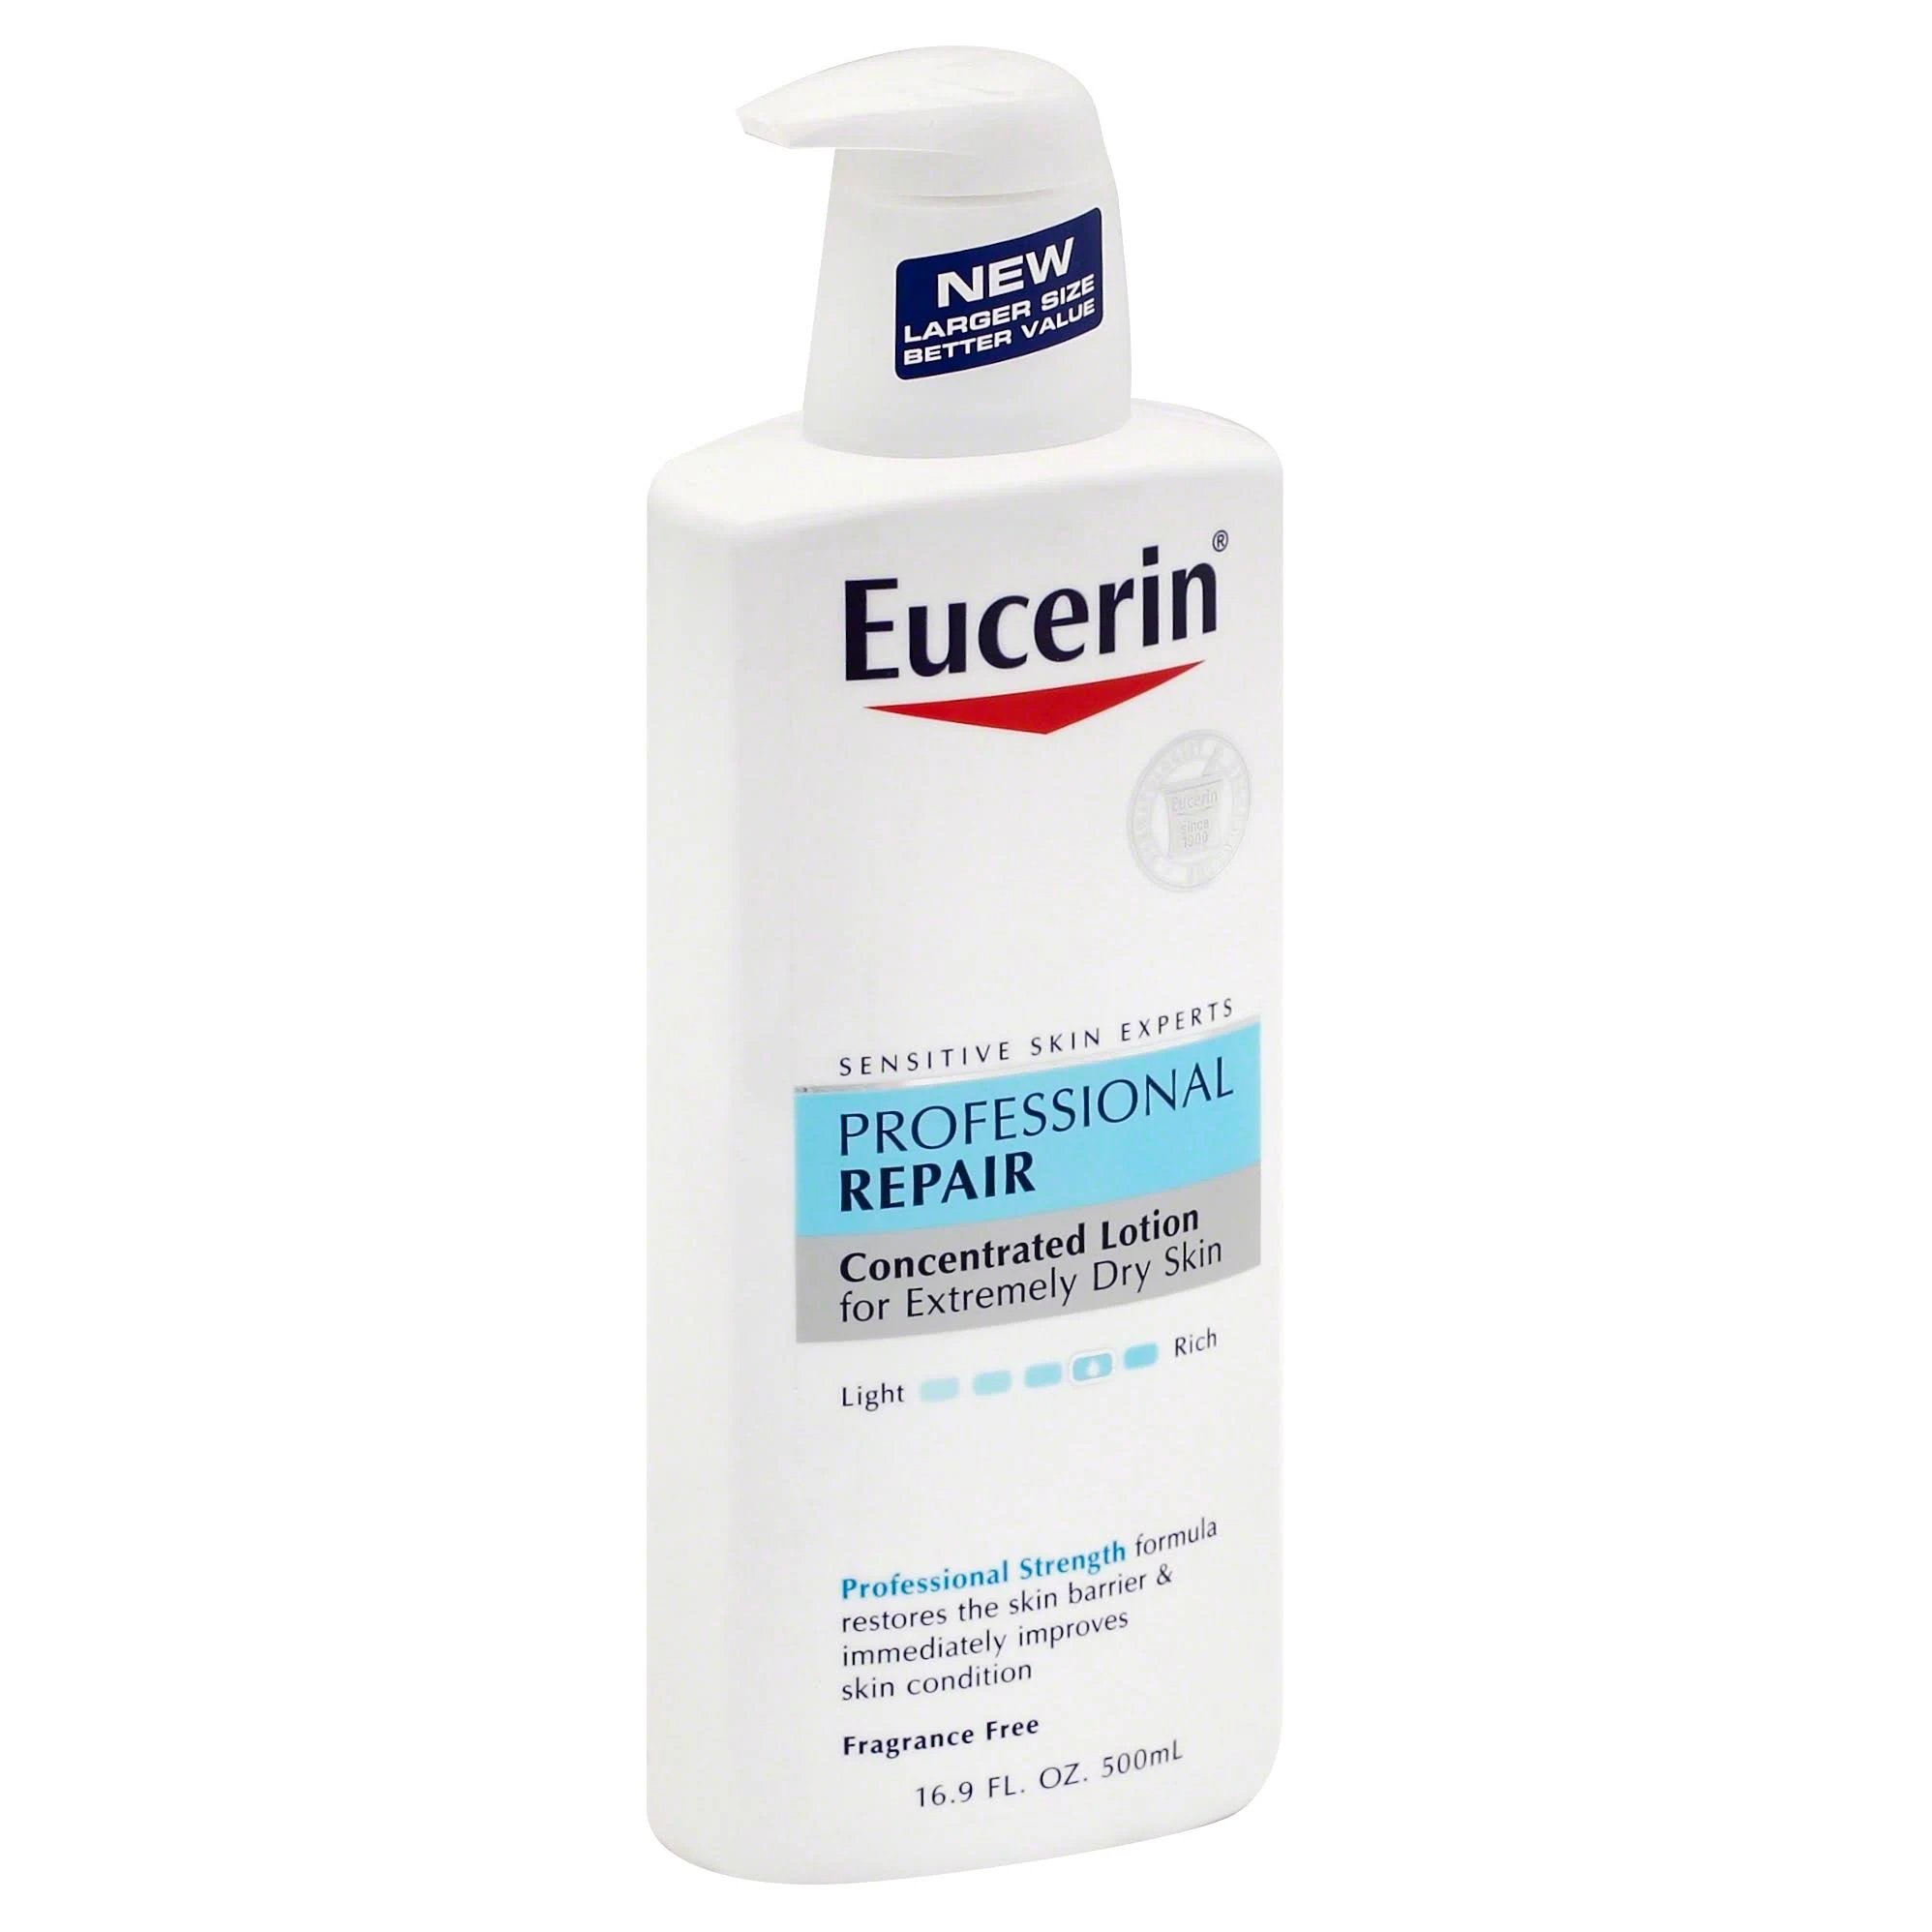 Eucerin Professional Repair Concentrated Lotion